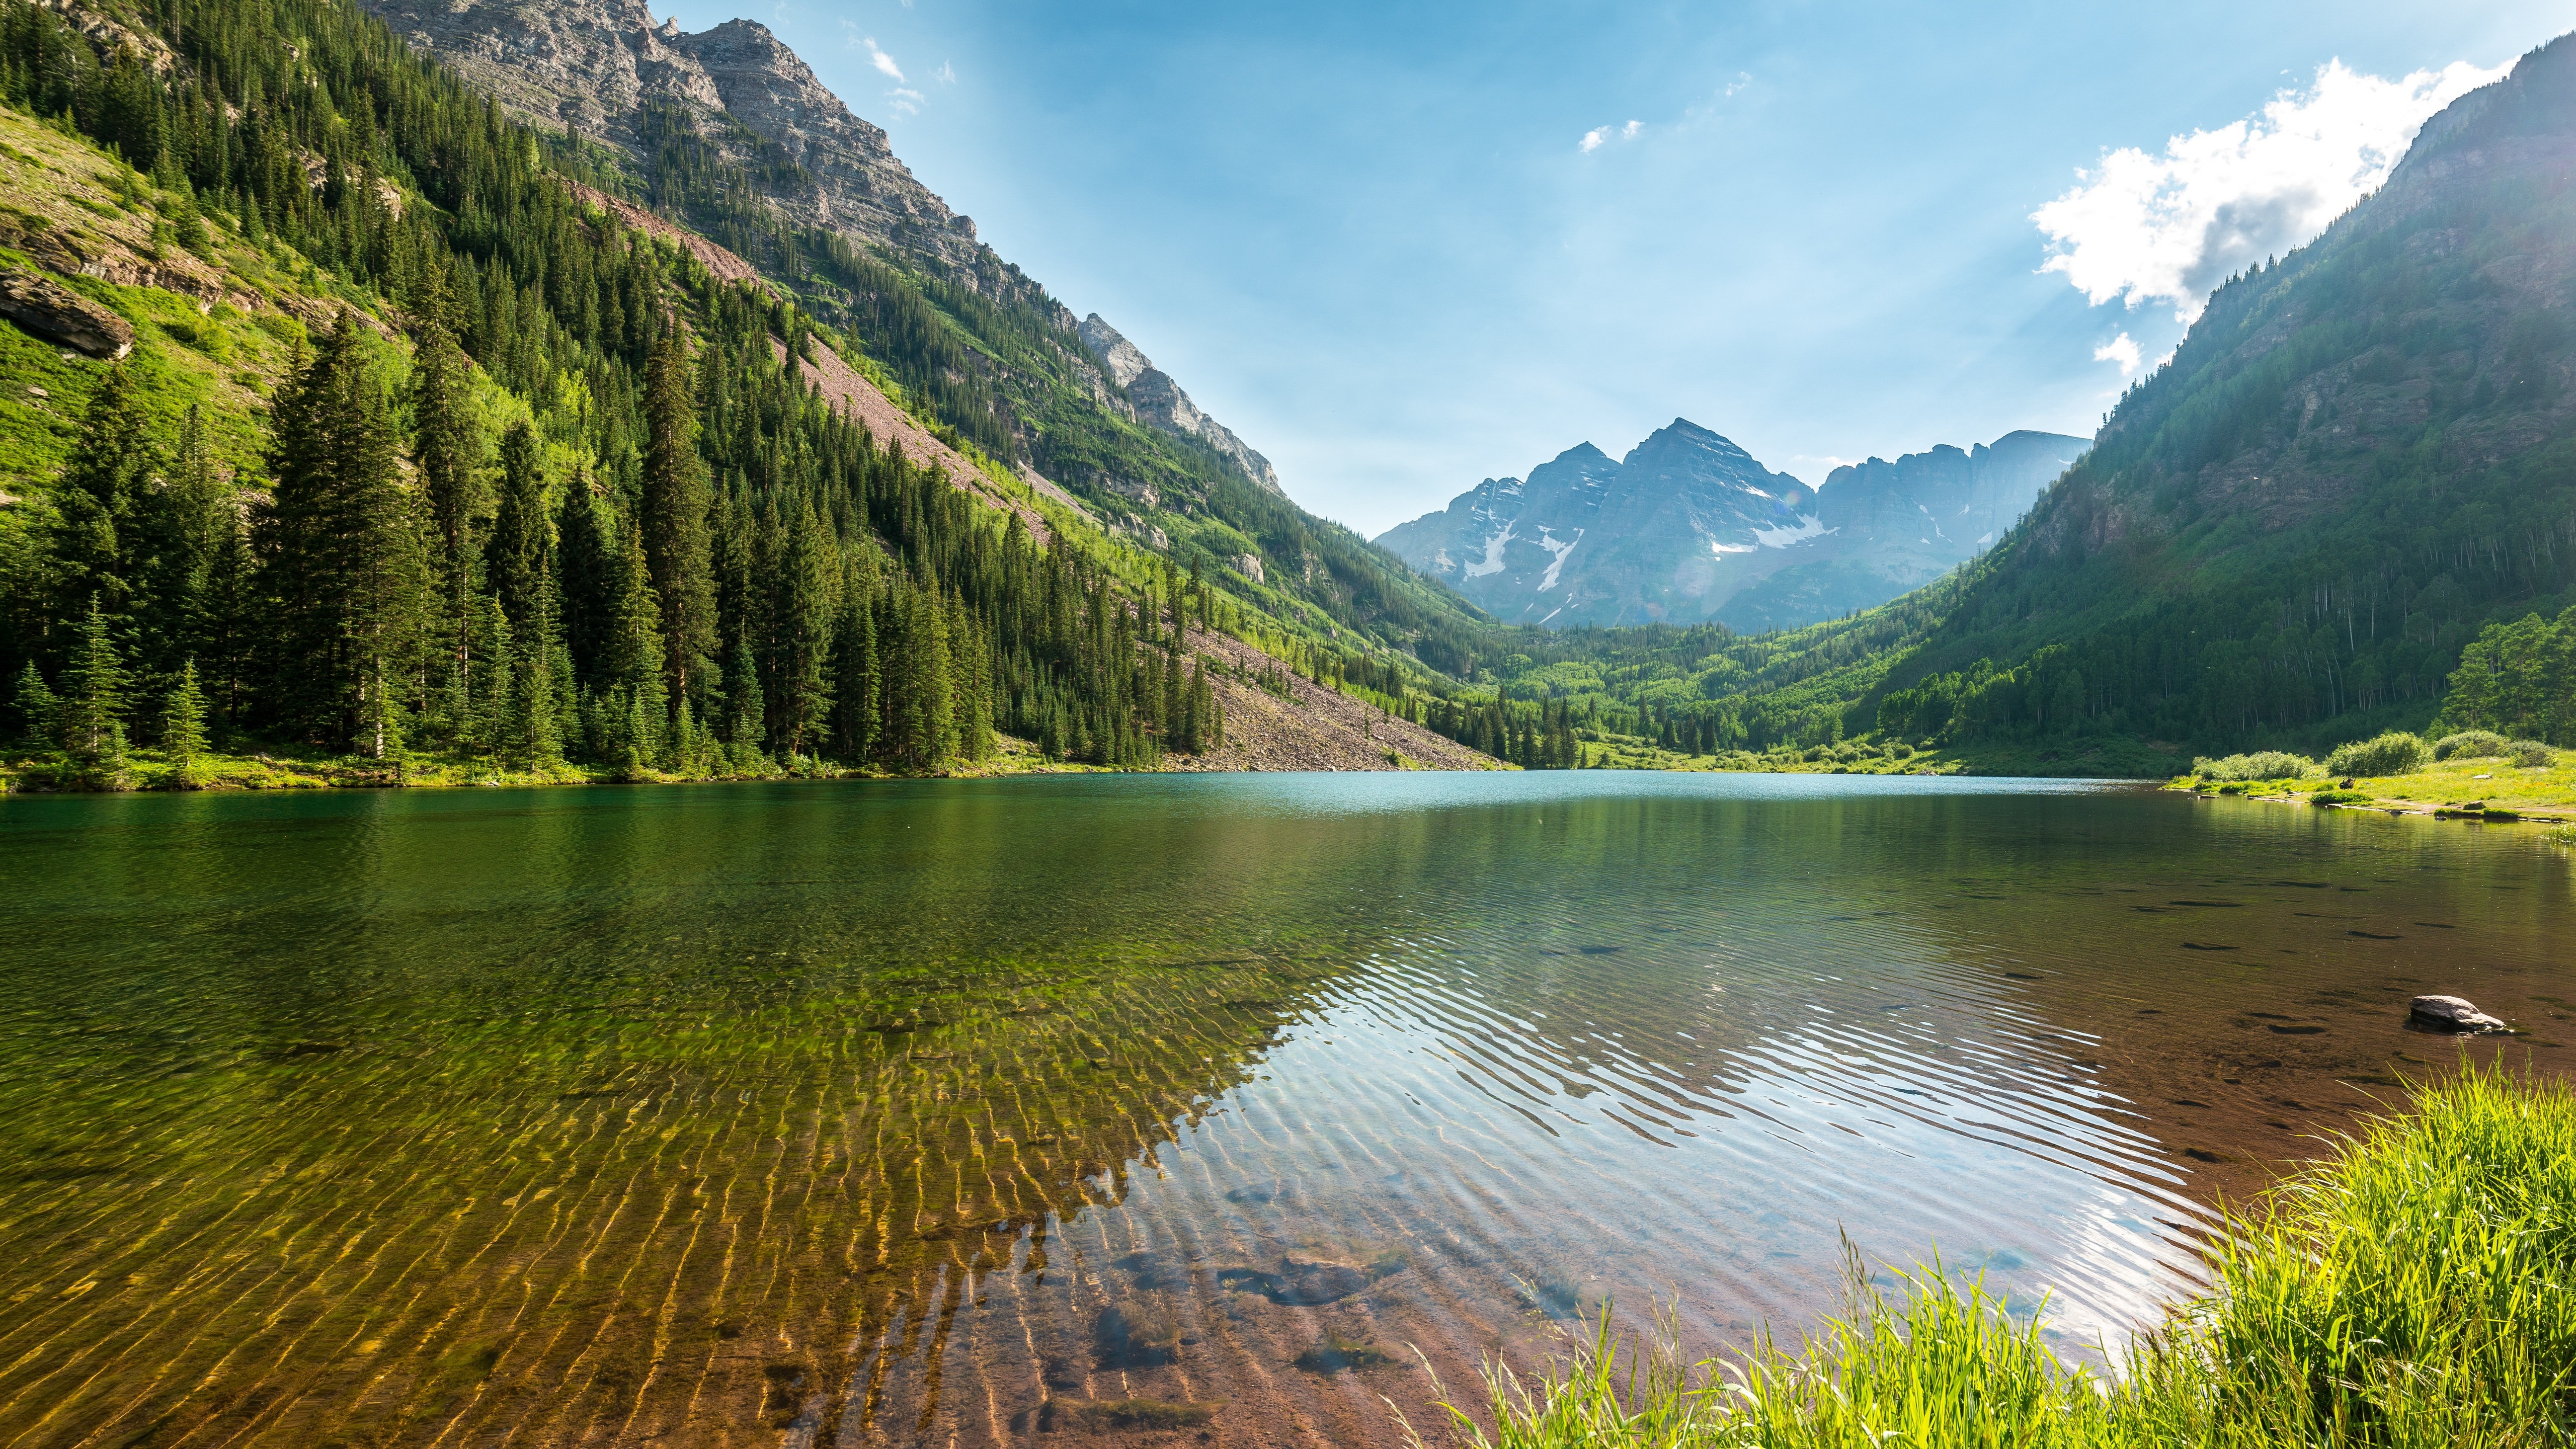 General 5120x2880 Colorado Maroon Bells landscape USA nature mountains lake outdoors